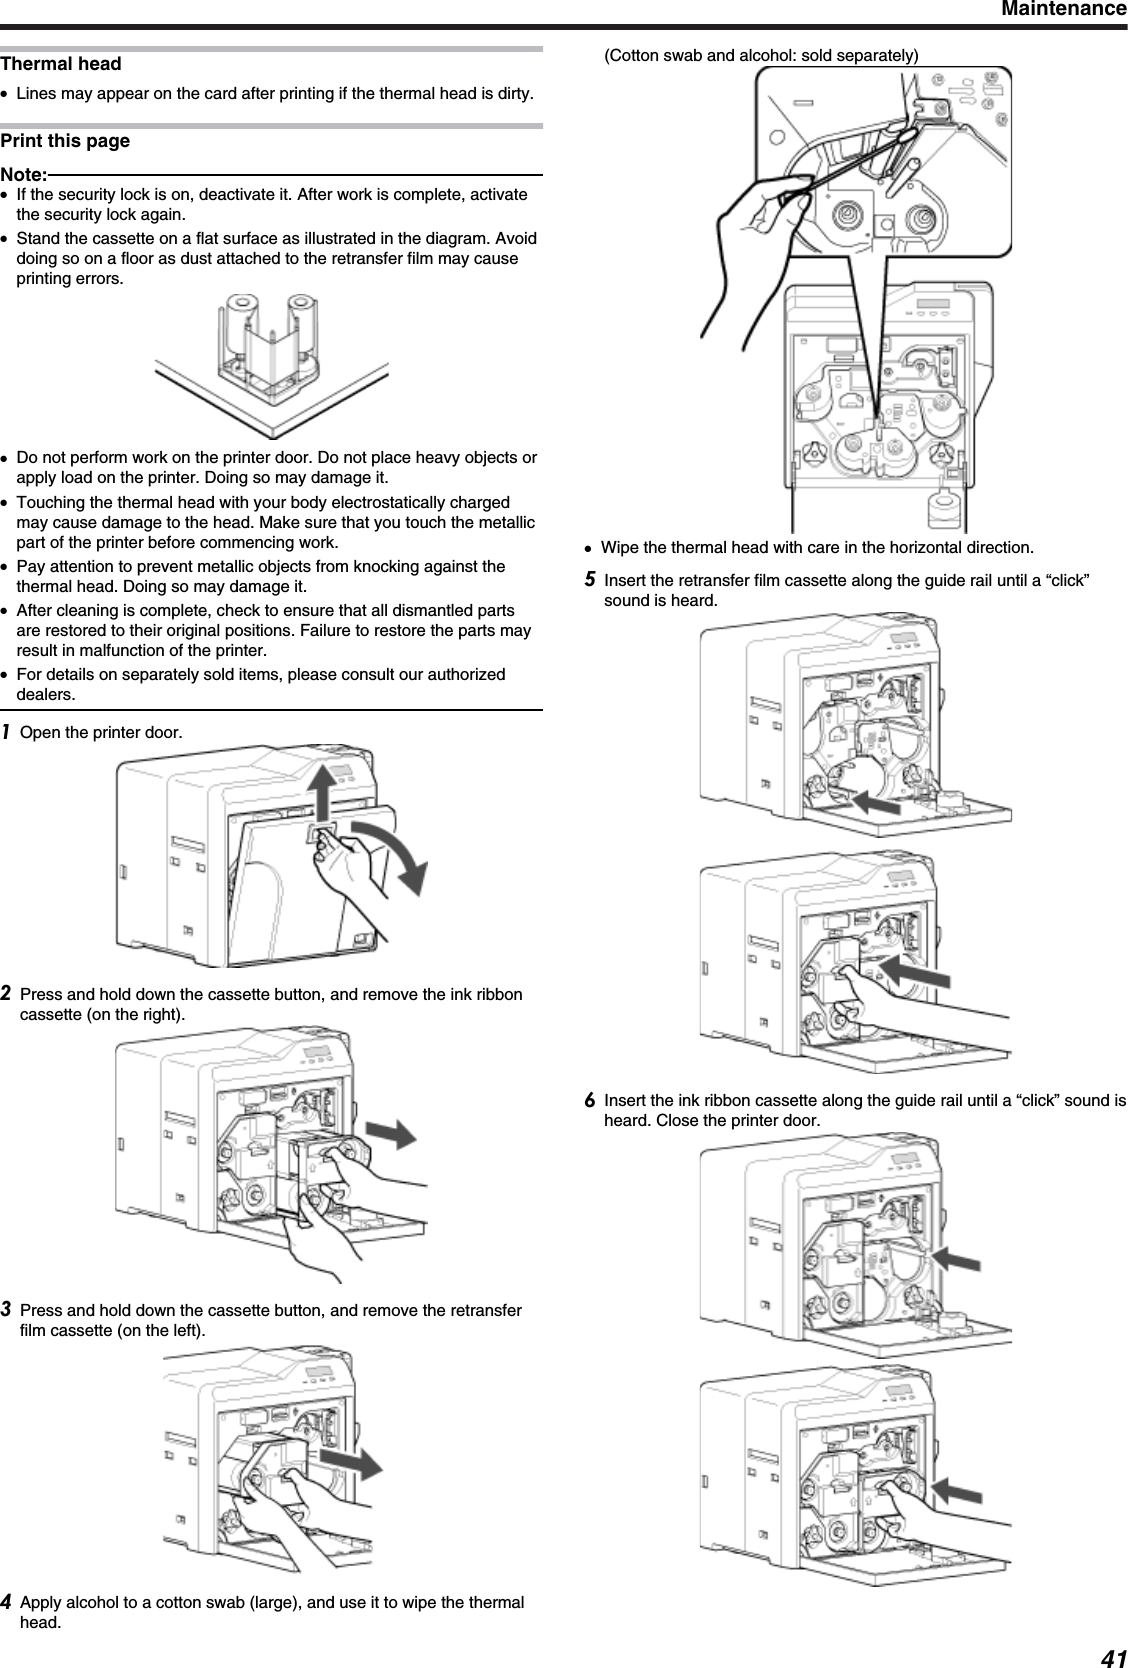 Thermal head●Lines may appear on the card after printing if the thermal head is dirty.Print this pageNote:●If the security lock is on, deactivate it. After work is complete, activatethe security lock again.●Stand the cassette on a flat surface as illustrated in the diagram. Avoiddoing so on a floor as dust attached to the retransfer film may causeprinting errors.●Do not perform work on the printer door. Do not place heavy objects orapply load on the printer. Doing so may damage it.●Touching the thermal head with your body electrostatically chargedmay cause damage to the head. Make sure that you touch the metallicpart of the printer before commencing work.●Pay attention to prevent metallic objects from knocking against thethermal head. Doing so may damage it.●After cleaning is complete, check to ensure that all dismantled partsare restored to their original positions. Failure to restore the parts mayresult in malfunction of the printer.●For details on separately sold items, please consult our authorizeddealers.Open the printer door.Press and hold down the cassette button, and remove the ink ribboncassette (on the right).Press and hold down the cassette button, and remove the retransferfilm cassette (on the left).Apply alcohol to a cotton swab (large), and use it to wipe the thermalhead.(Cotton swab and alcohol: sold separately)●Wipe the thermal head with care in the horizontal direction.Insert the retransfer film cassette along the guide rail until a “click”sound is heard.Insert the ink ribbon cassette along the guide rail until a “click” sound isheard. Close the printer door.Maintenance41